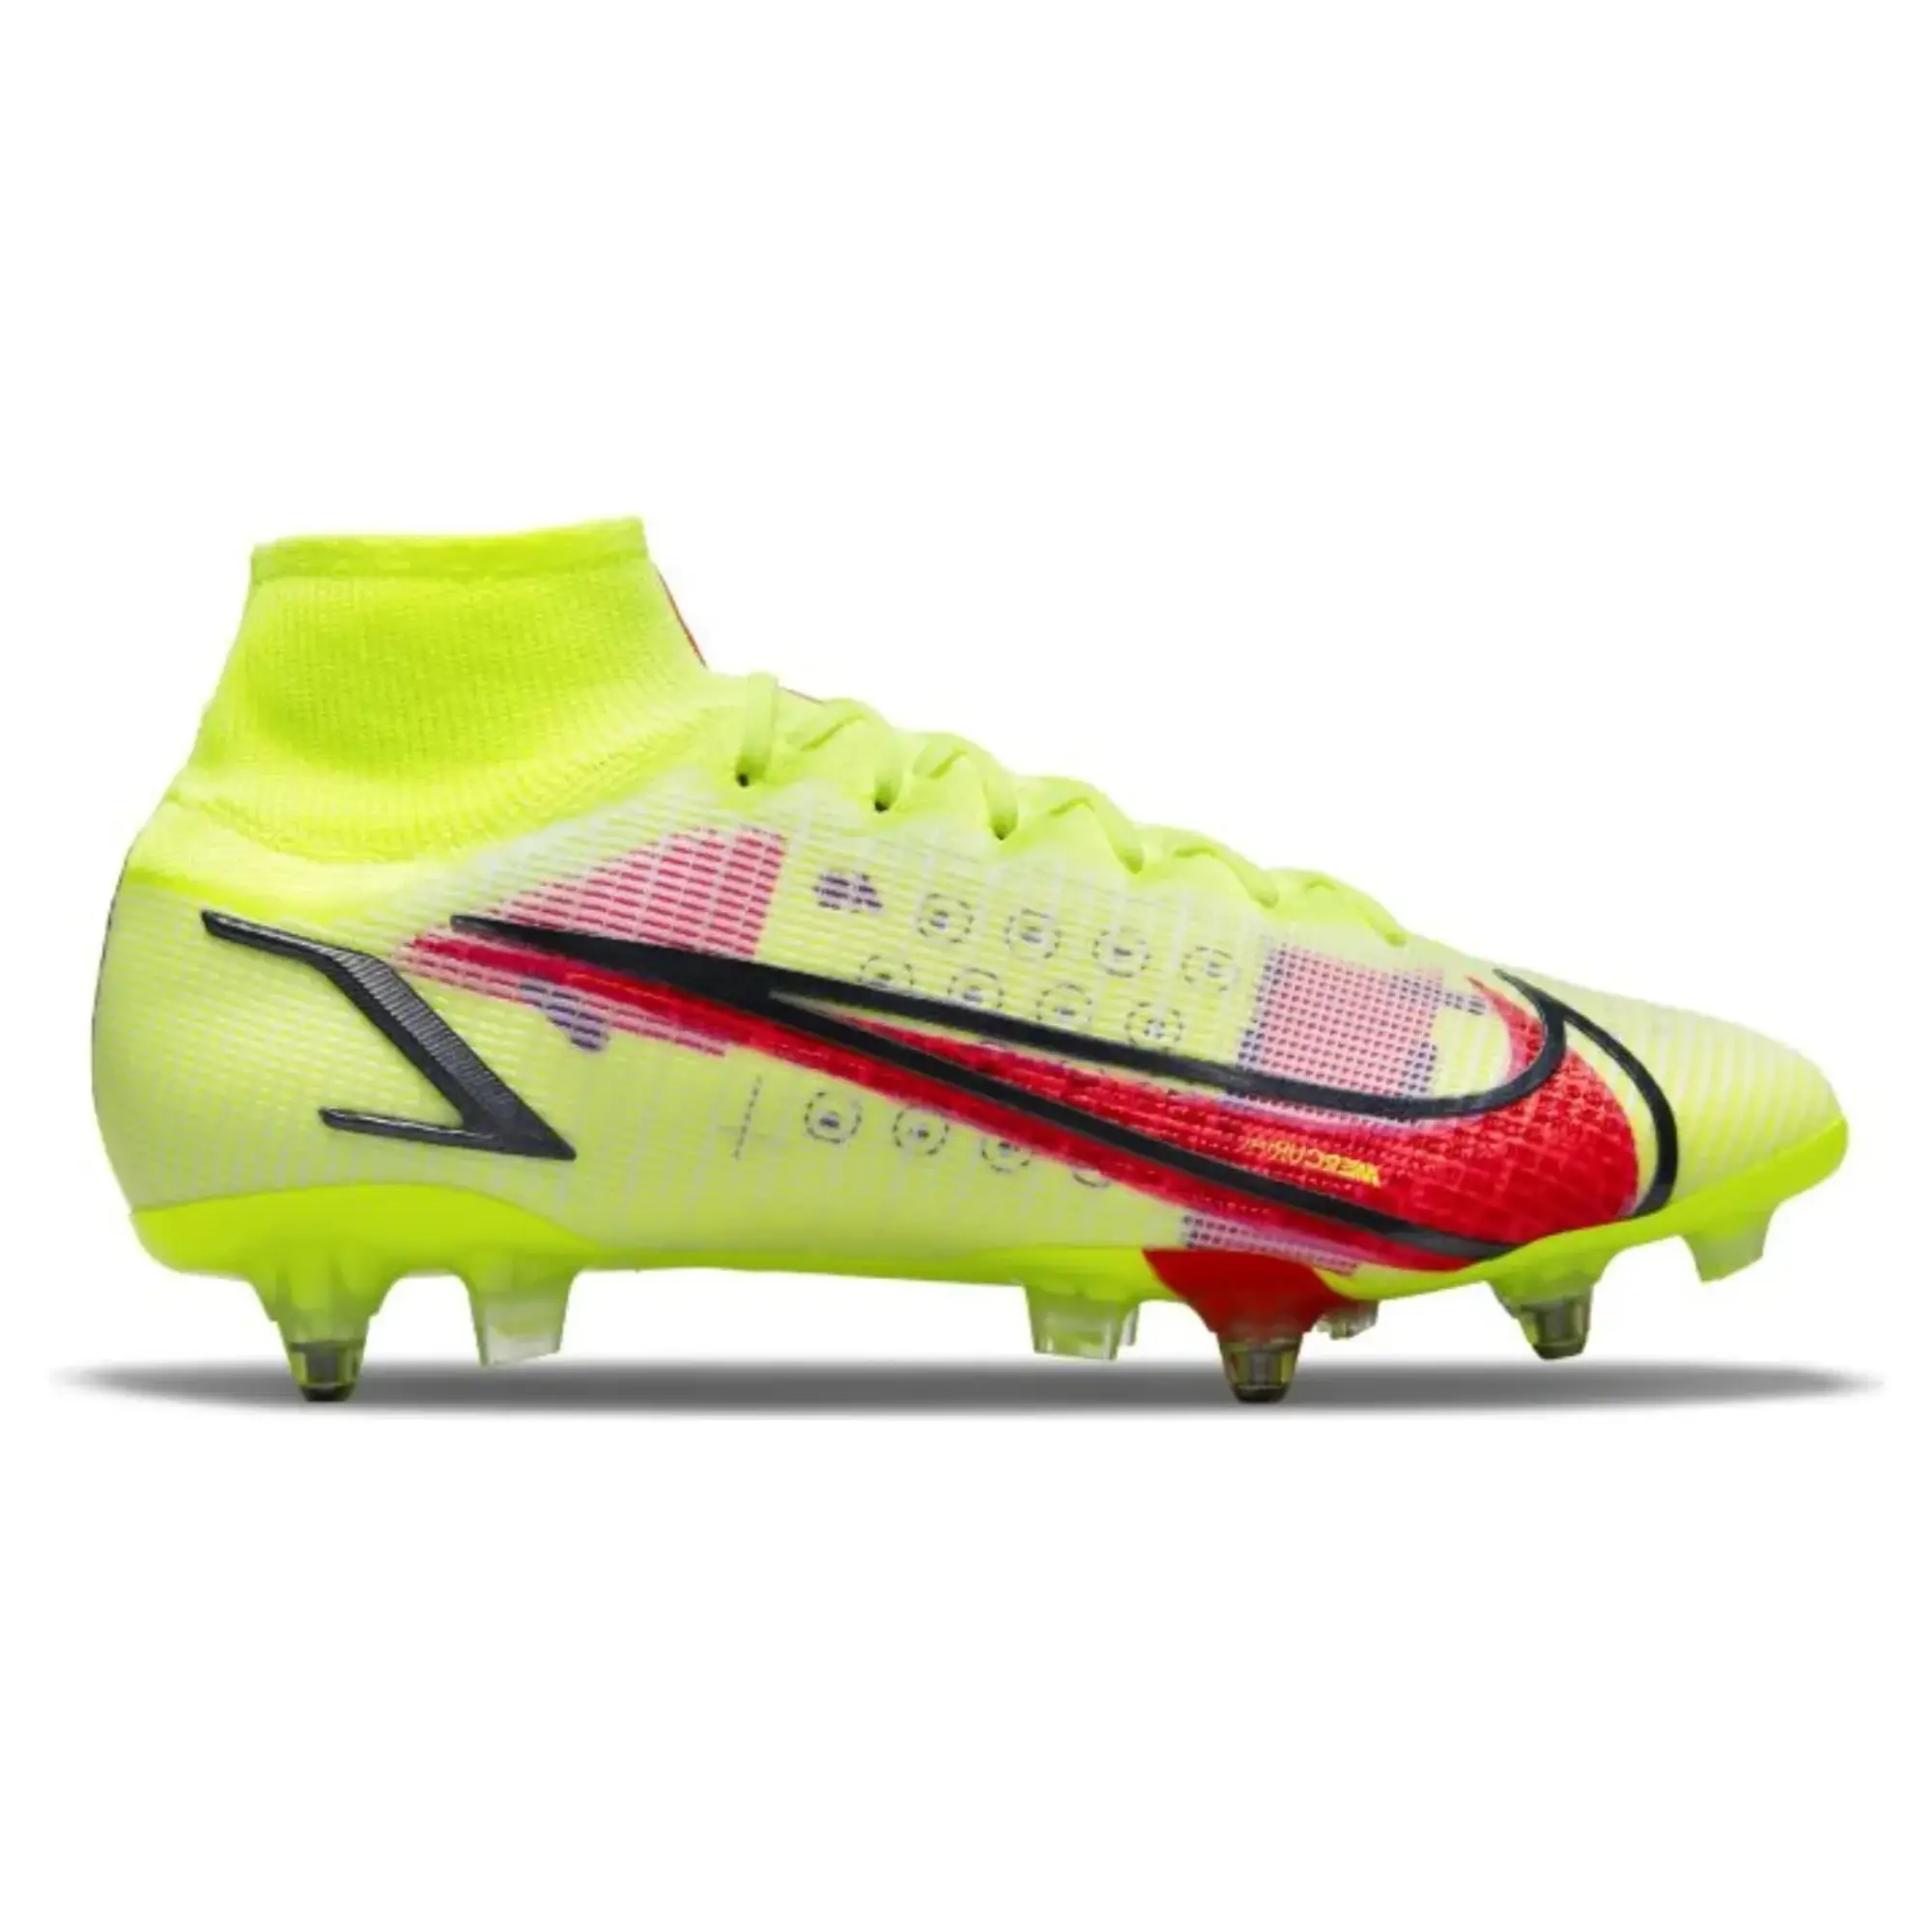 Nike Mercurial Superfly 8 Elite SG-Pro AC Soft-Ground Football Boot - Yellow